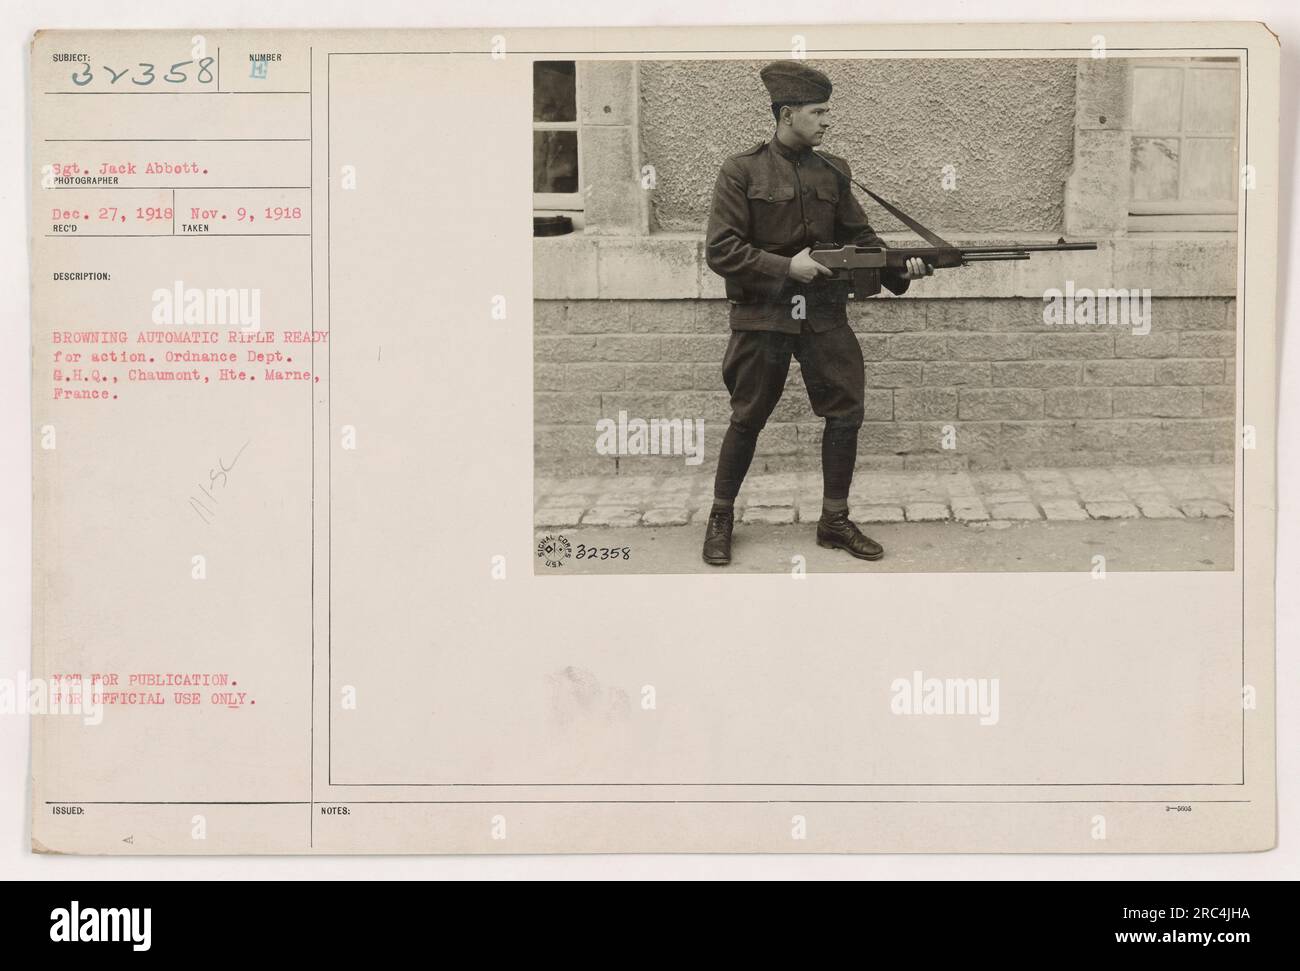 Sgt. Jack Abbott standing next to a Browning Automatic Rifle (BAR) in readiness for action. The photograph was taken on November 9, 1918, at the Ordnance Dept., G.H.Q. in Chaumont, Hte. Marne, France. It is marked with the reference number 32358 and was not intended for publication, only for official use. Stock Photo